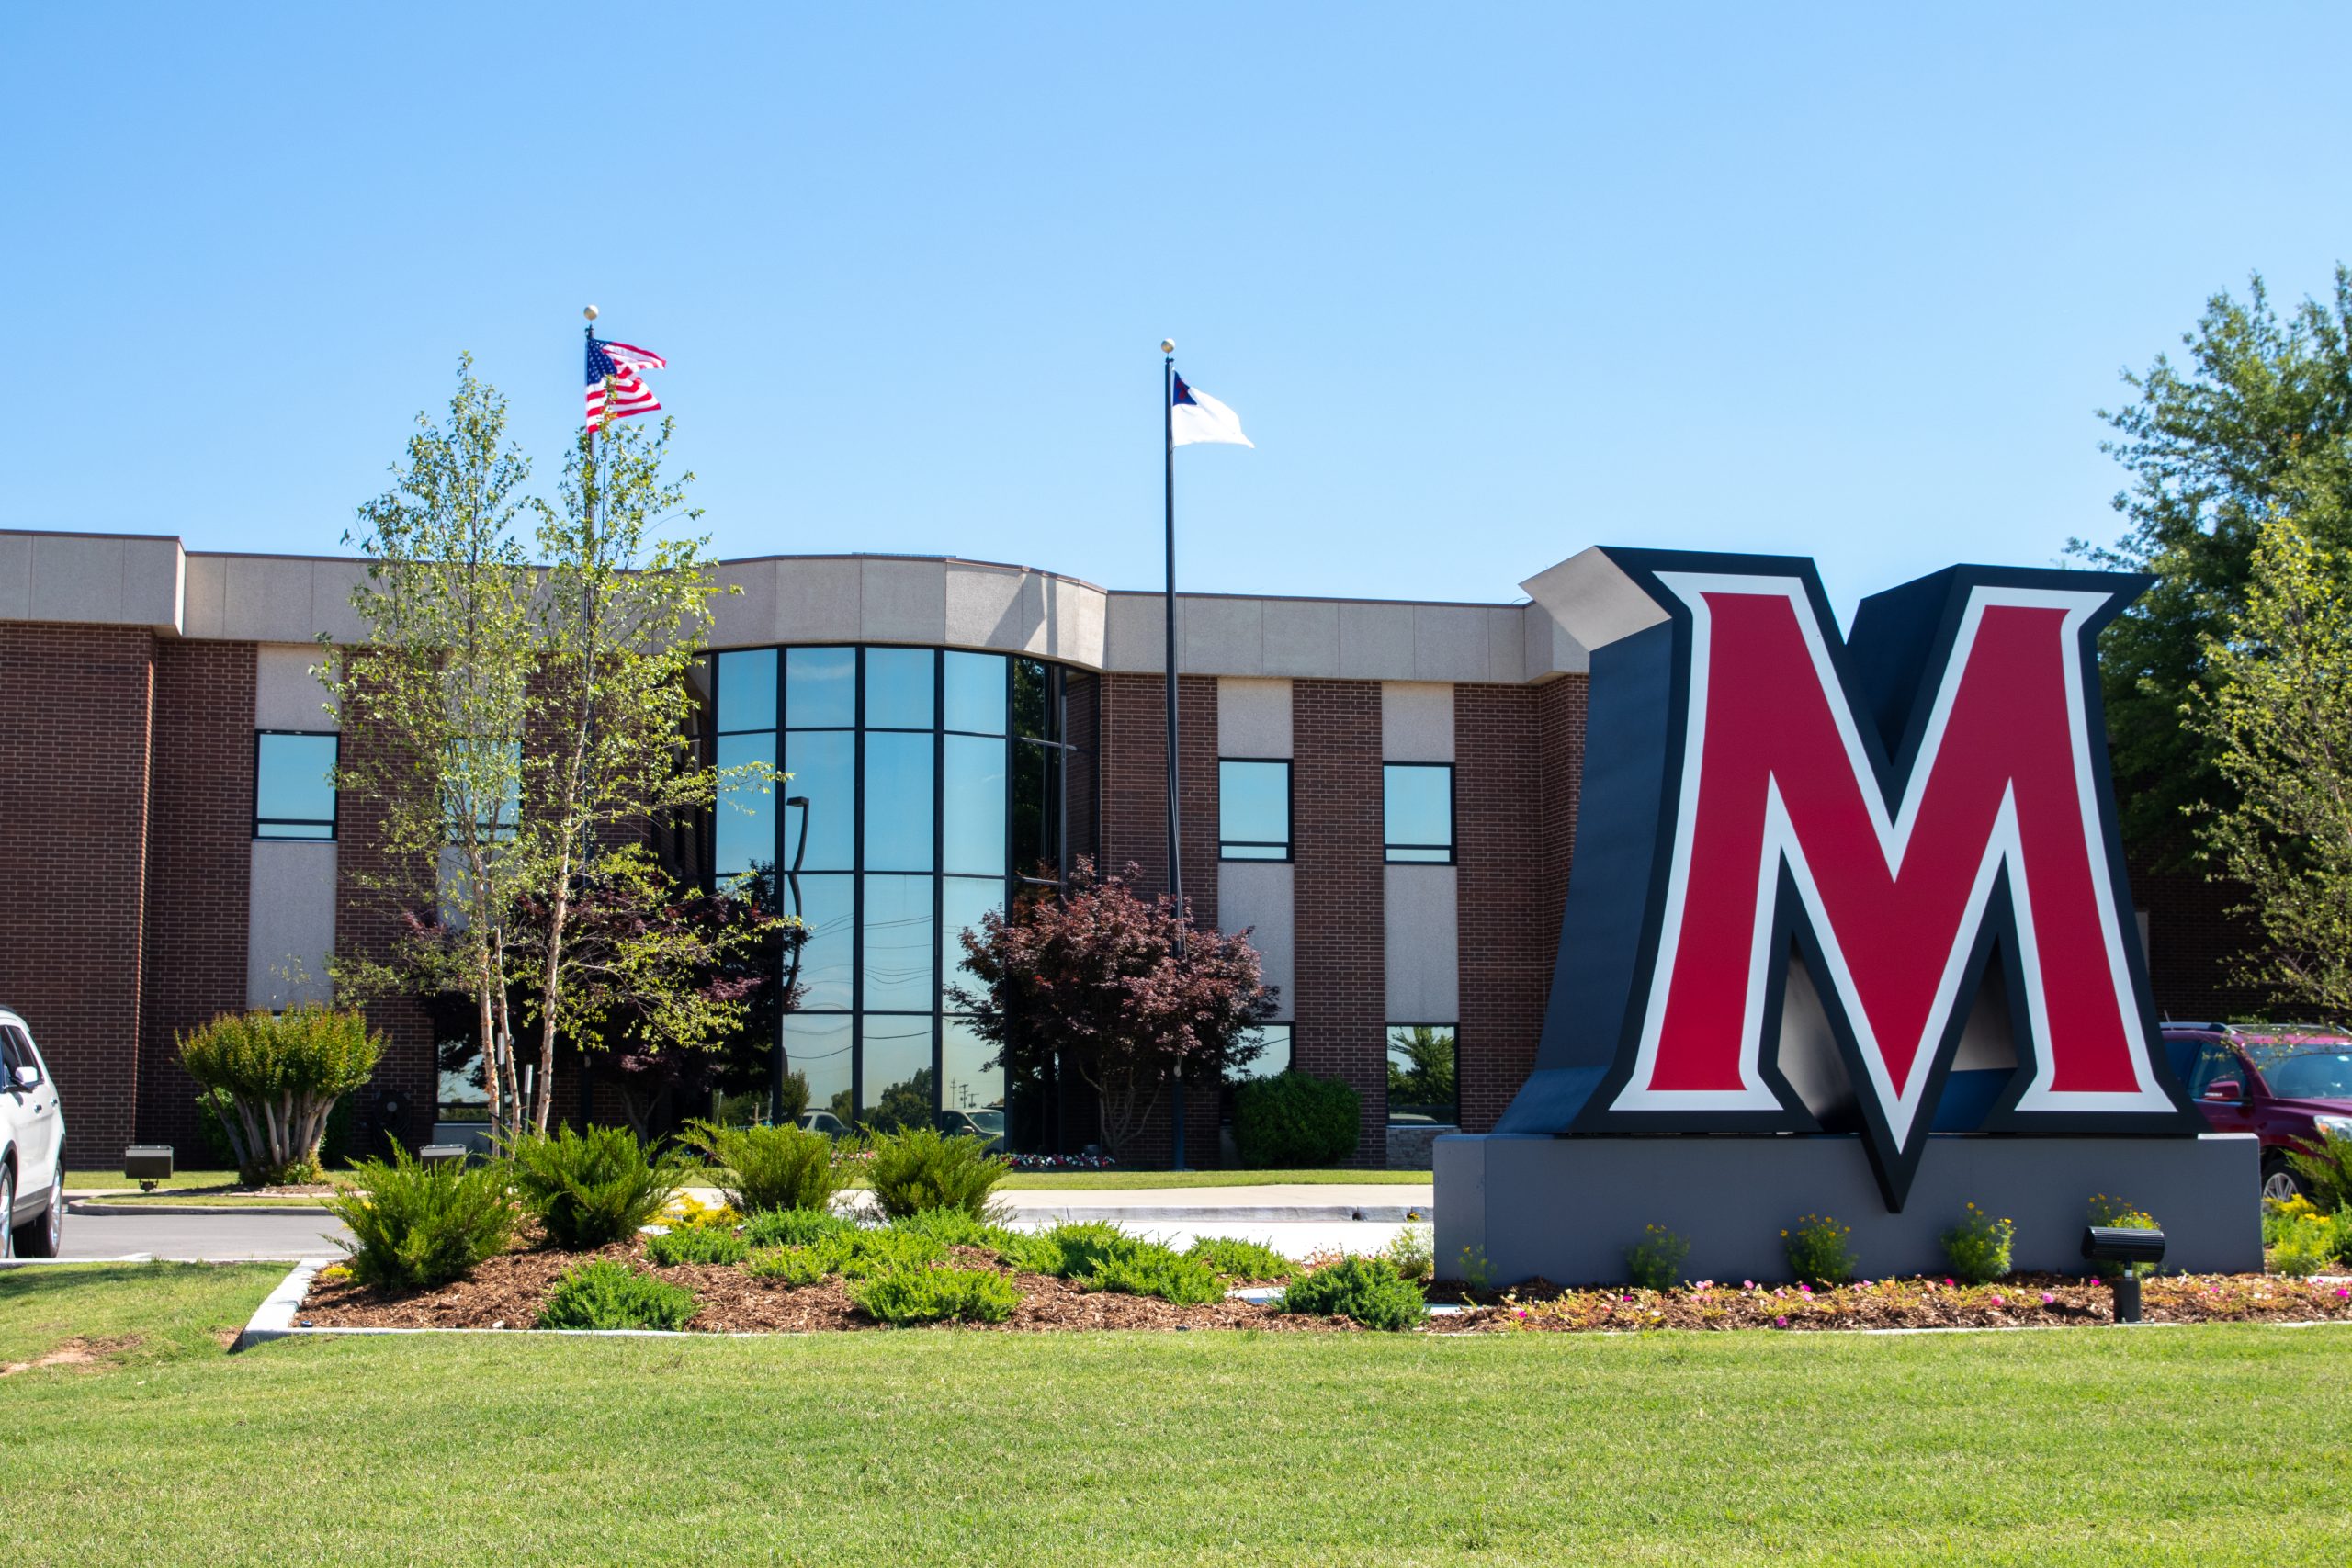 MACU Joins The Council for Christian Colleges & Universities